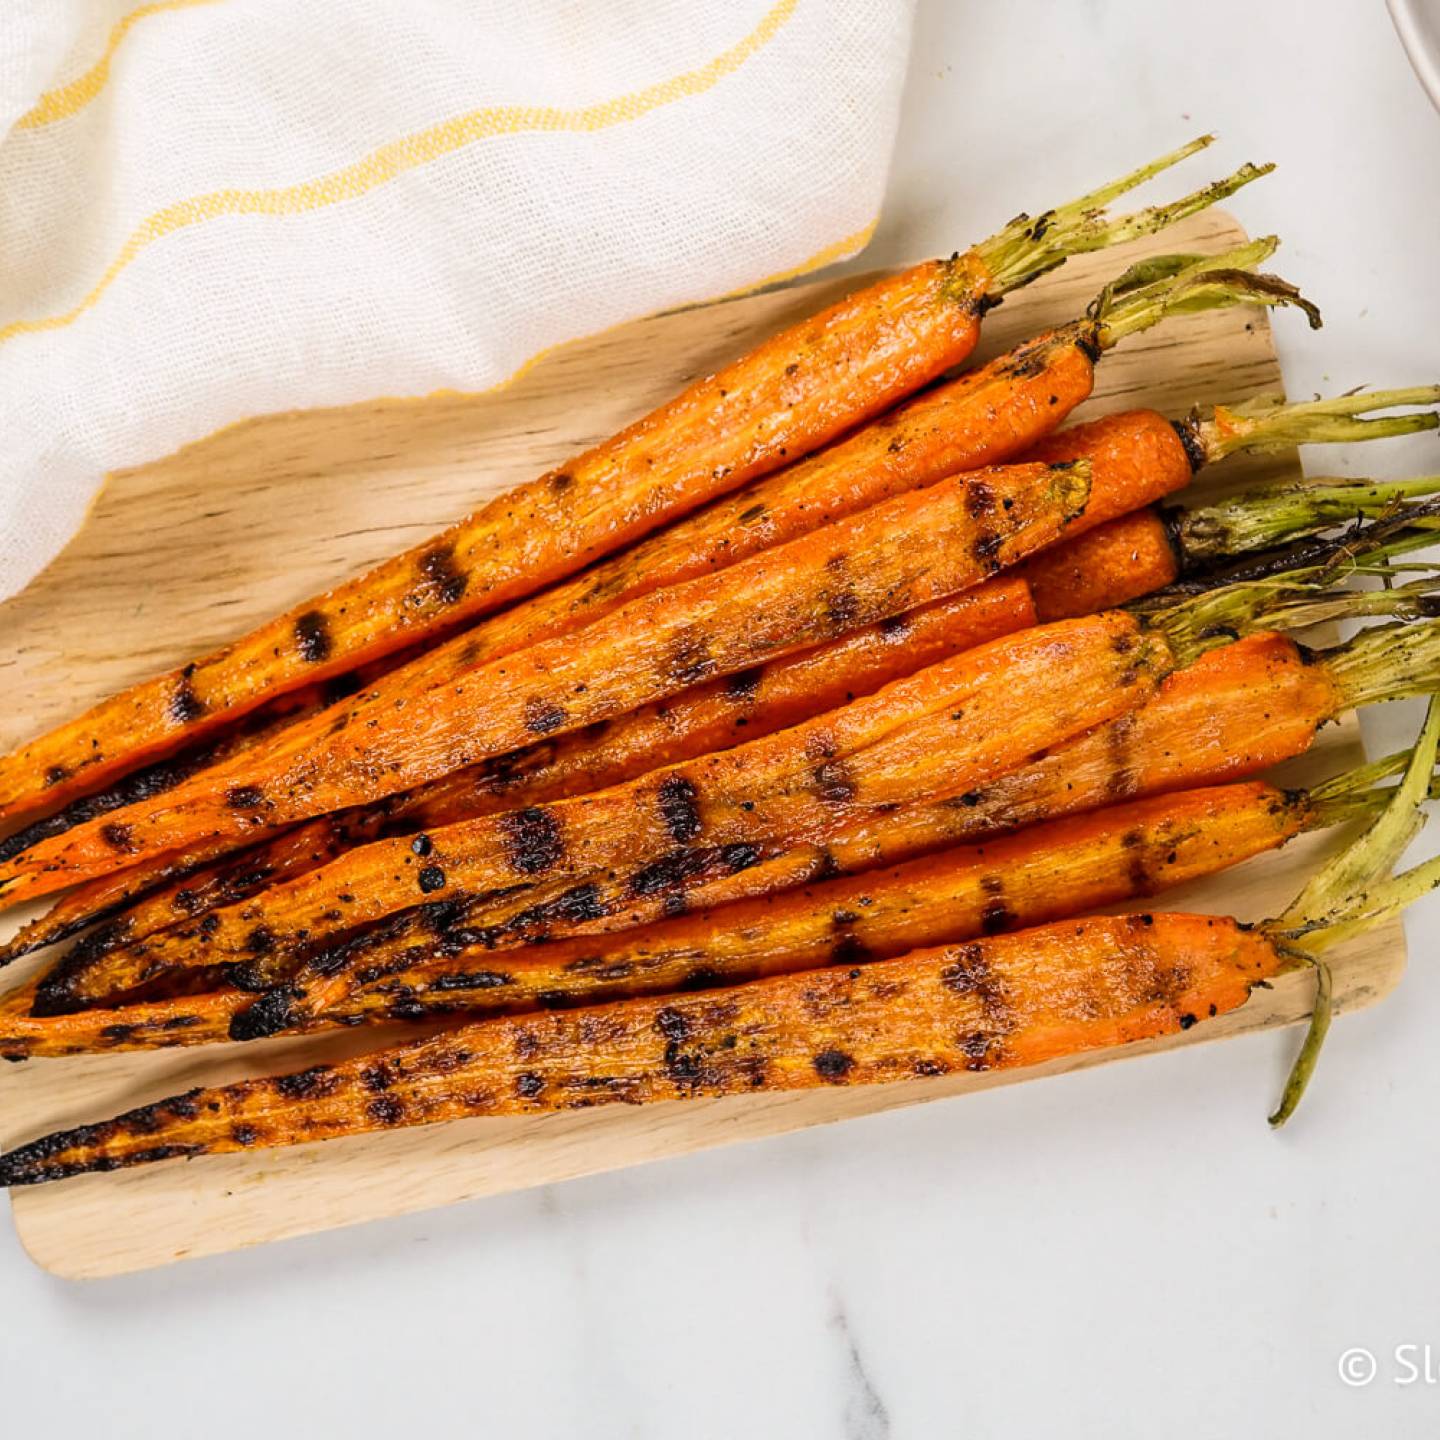 Grilled carrots with charred grill marks on a cutting board with sauce on the side.